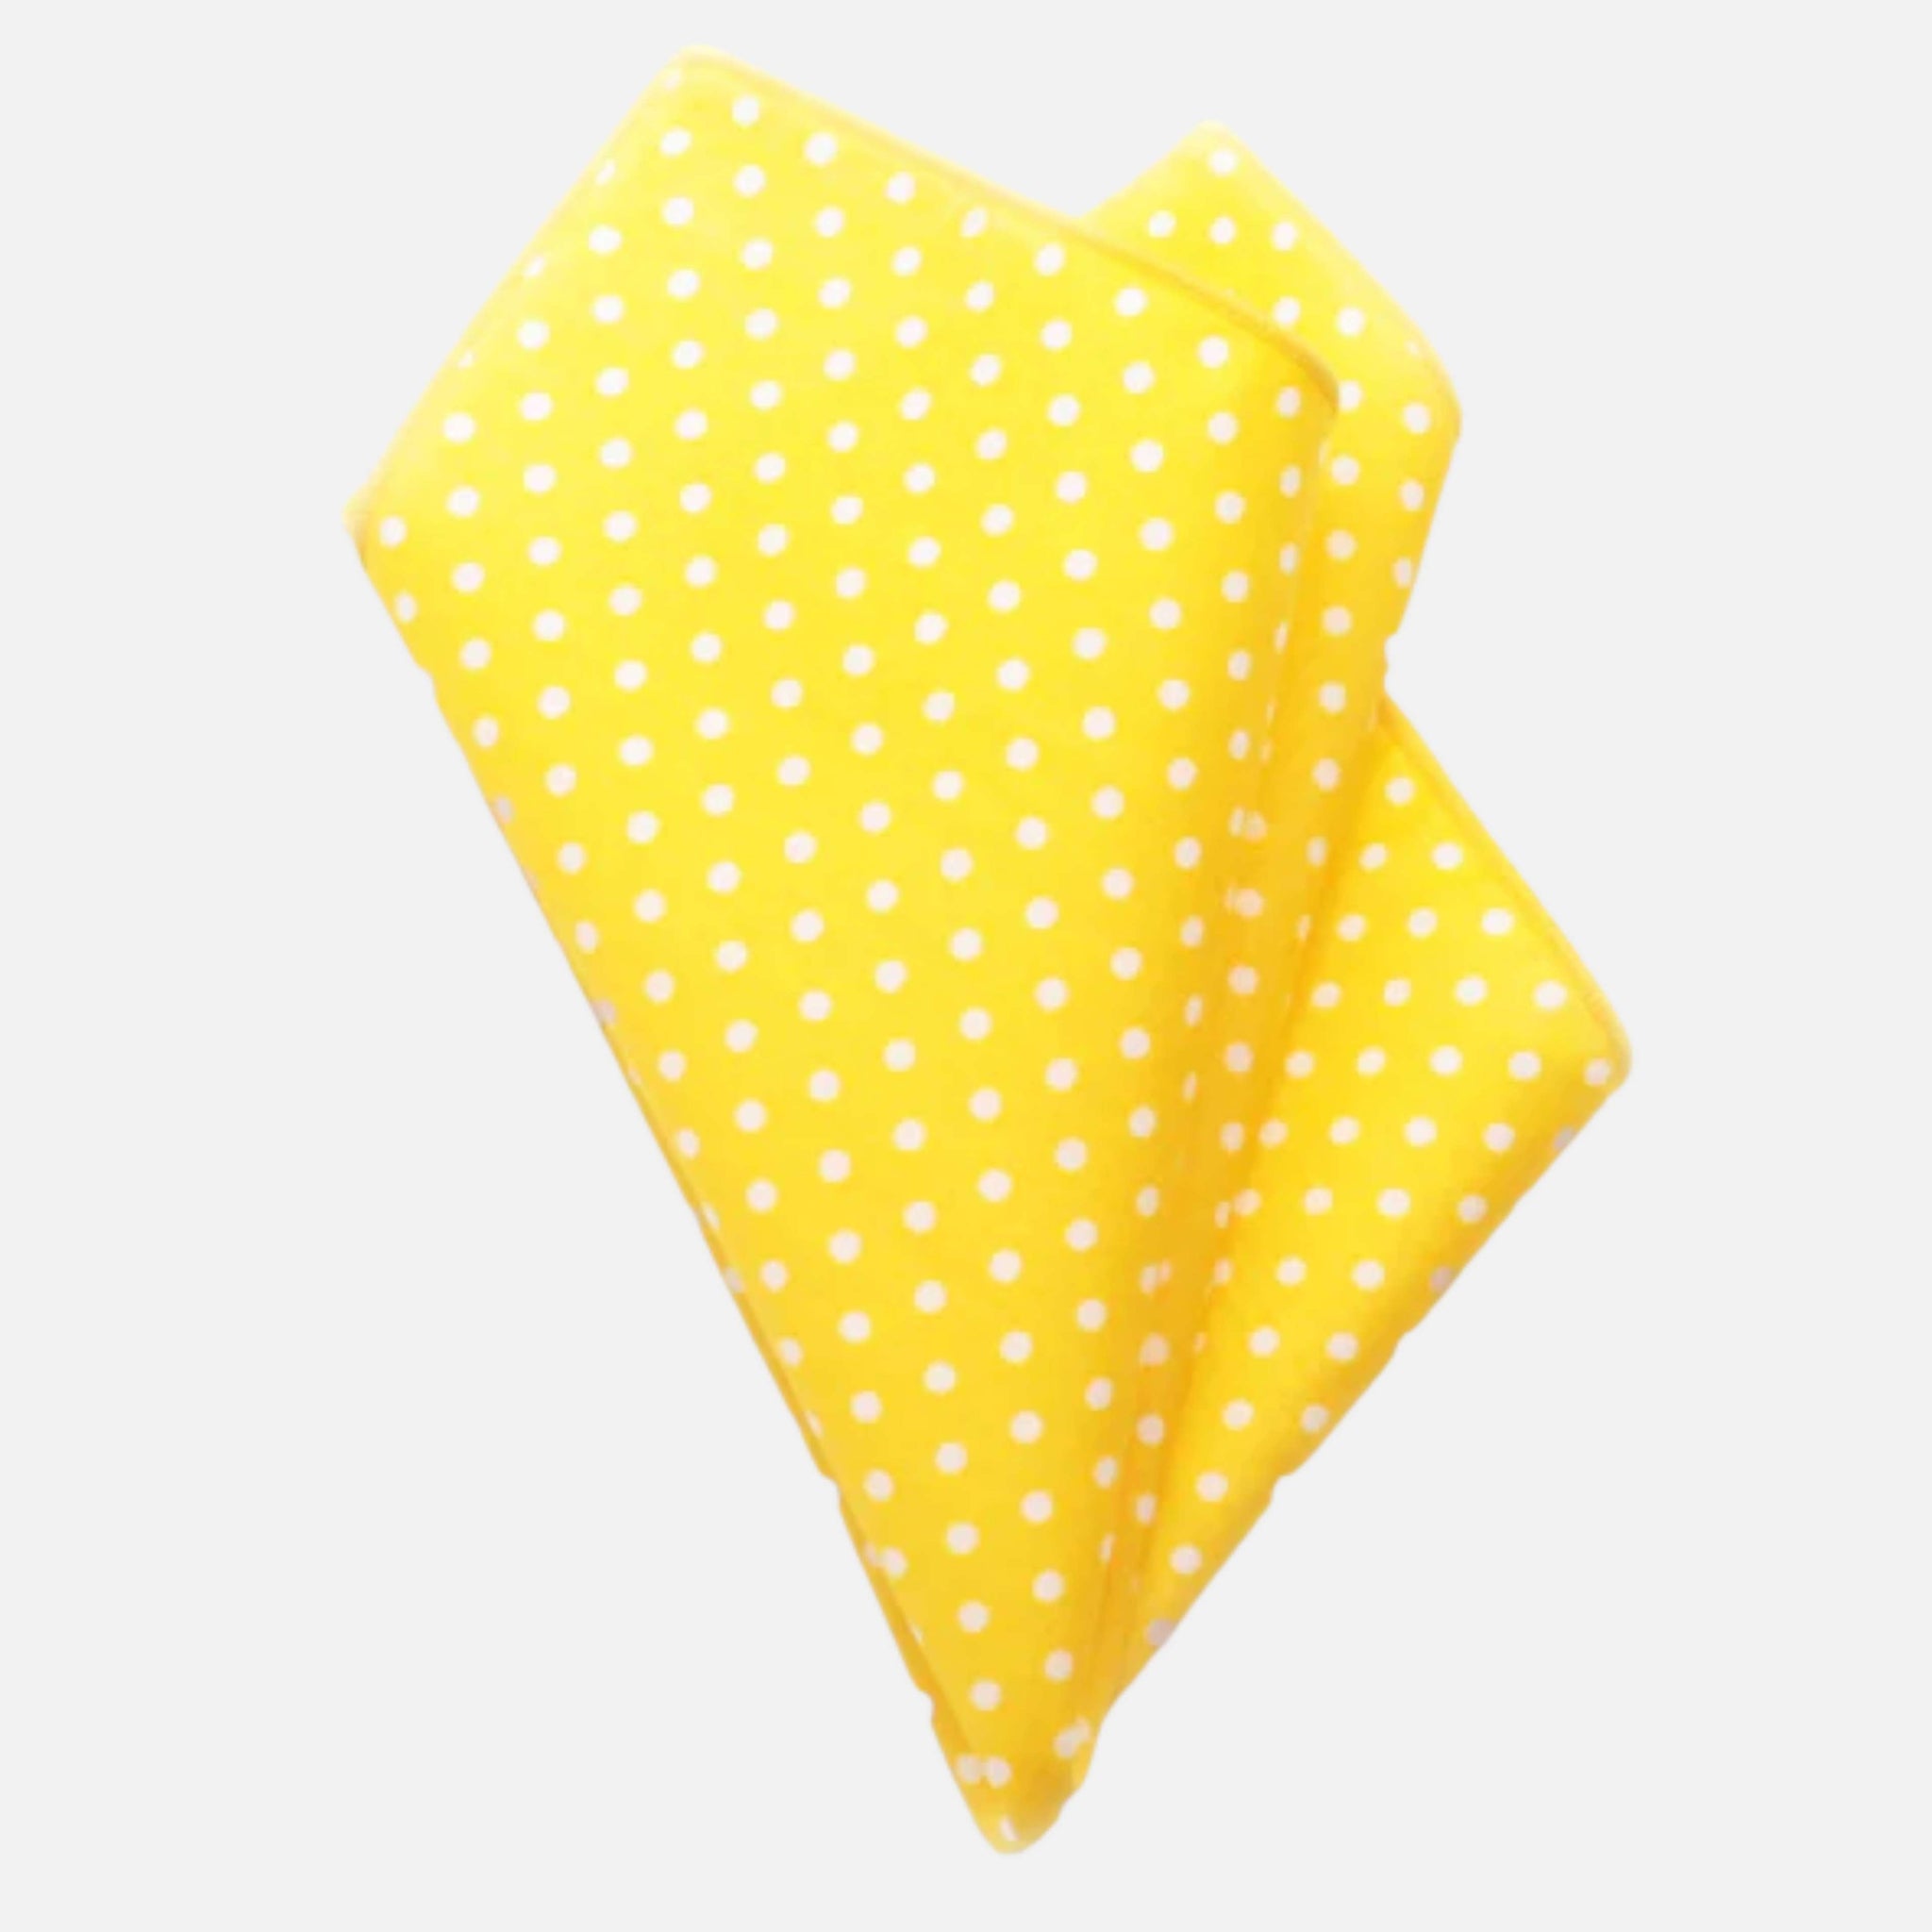 Yellow pocket square with small white polka dots